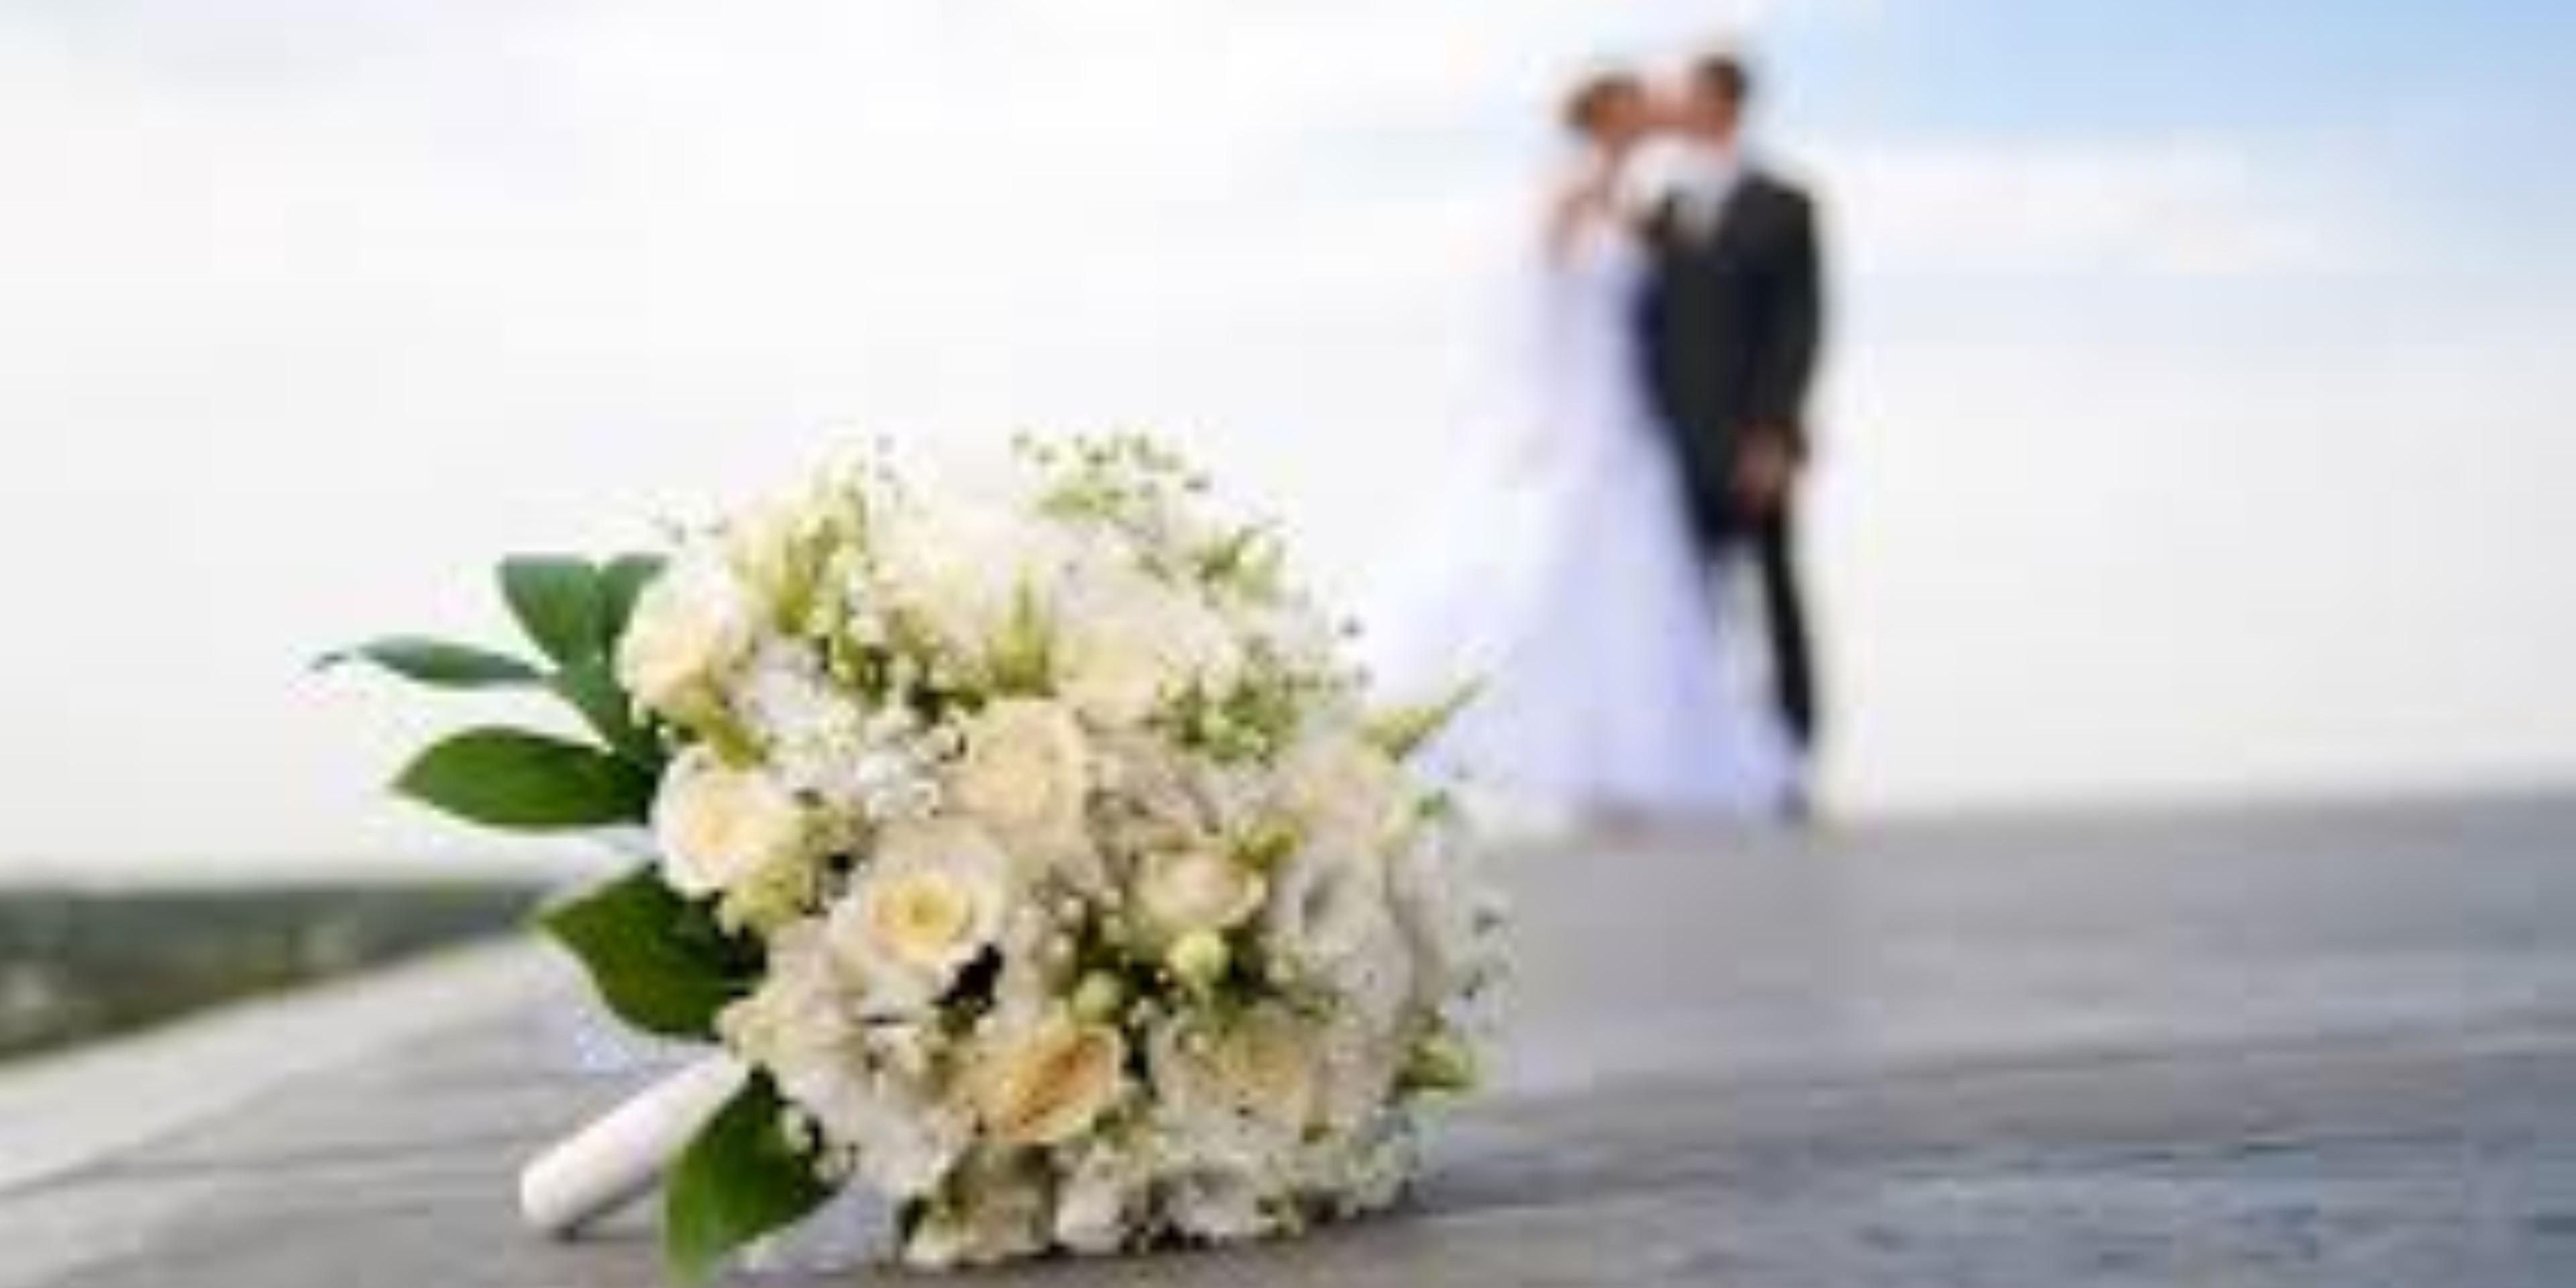 Our staff is happy to offer room blocks for weddings. Check out some of these wedding venues located near us: 3.2 miles from Venue 92,  4.9 miles from East Cobb Center, 6 miles from Rocky Lake Estate, 7.9 miles from Butterfly Pavilion and 8.2 miles from The Grande at Kennesaw 
